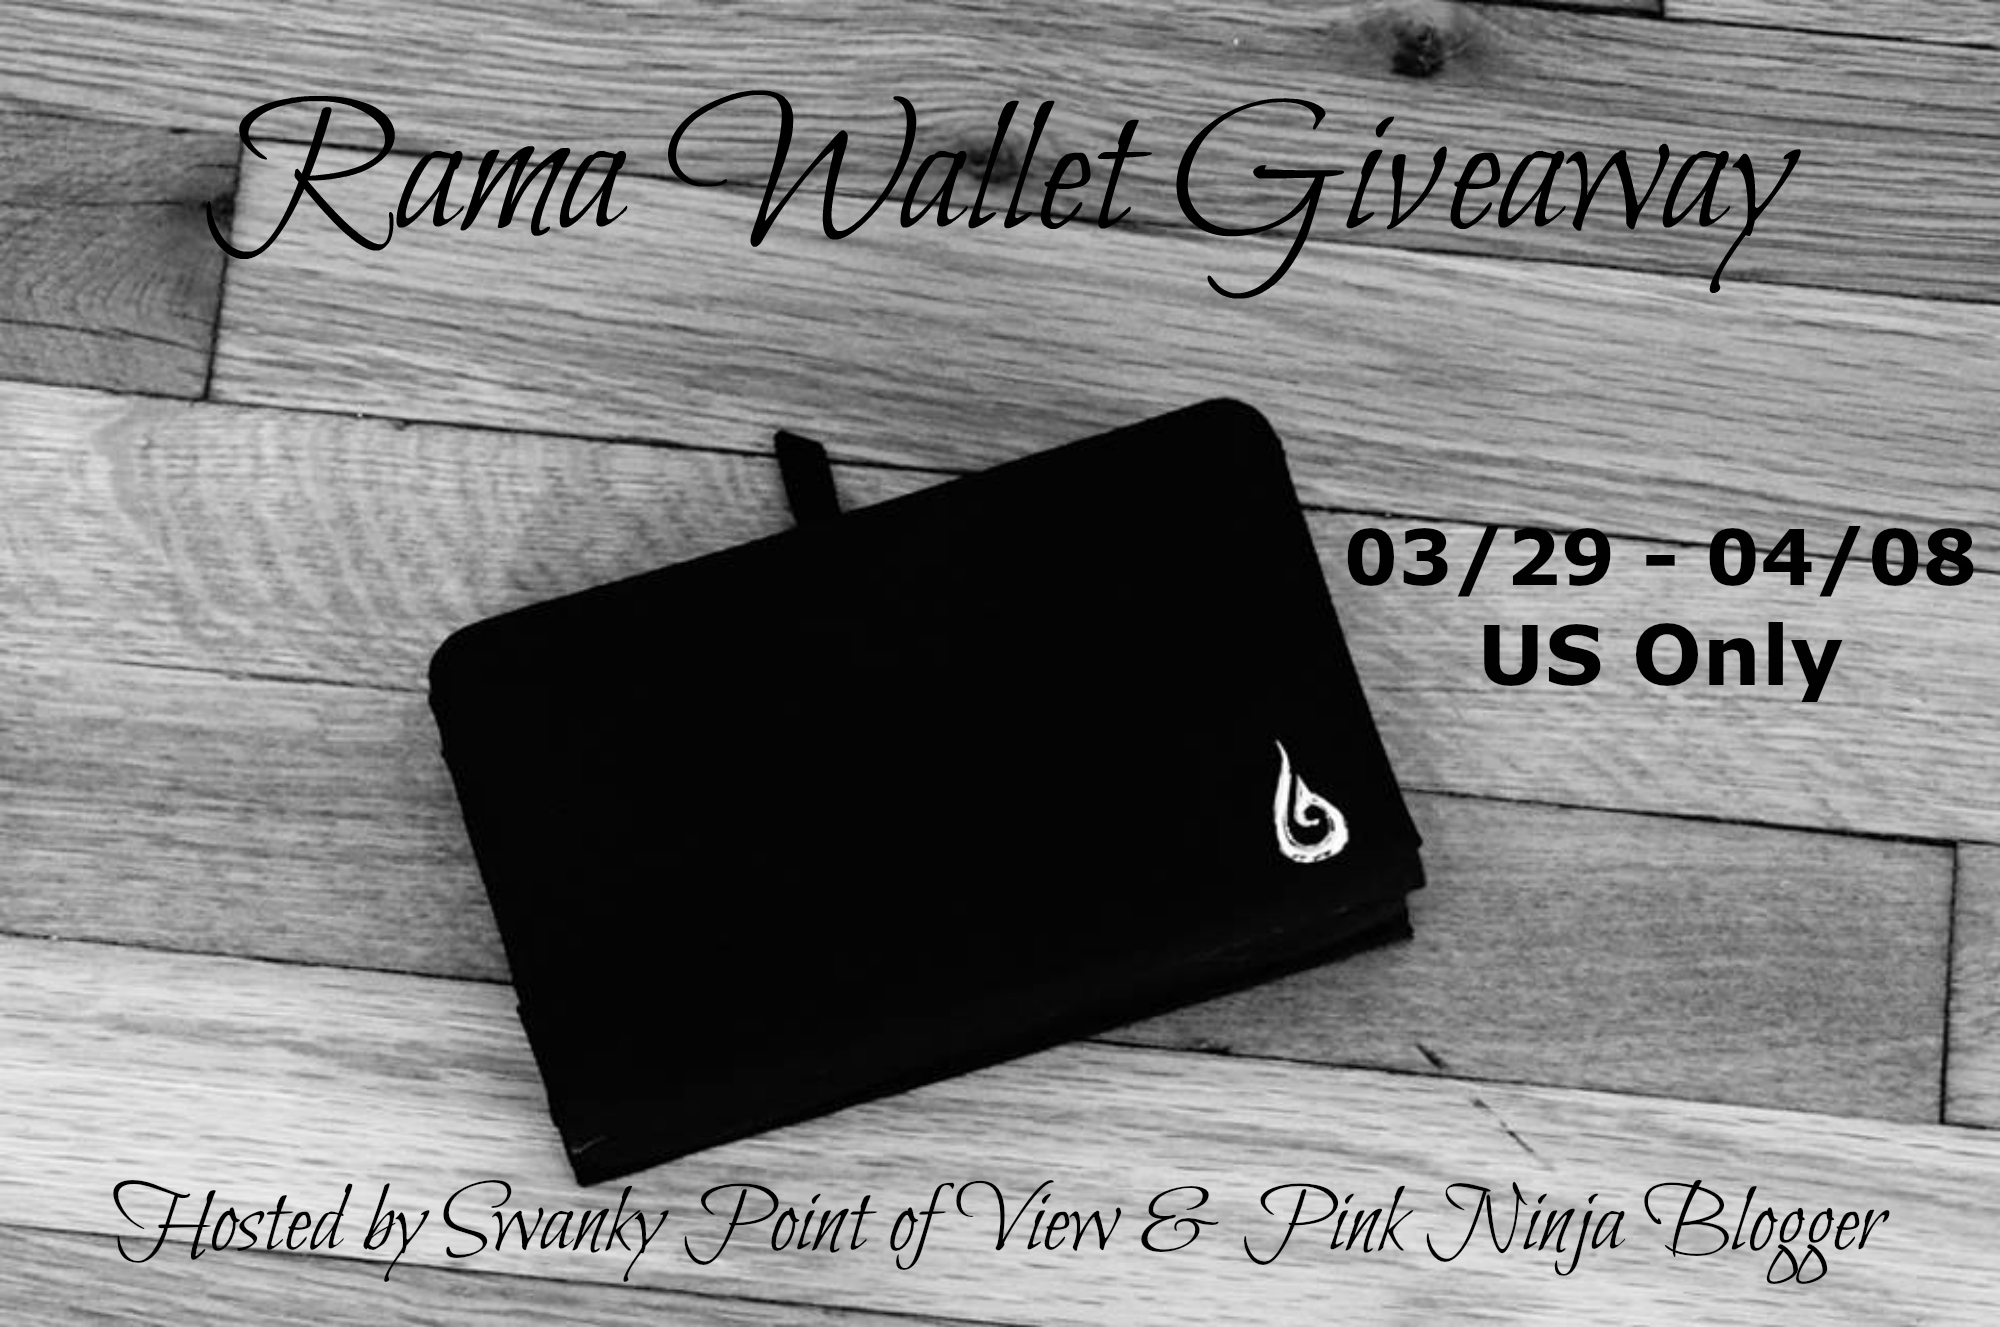 Monicas Rants Raves and Reviews: Rama Wallet Giveaway - ends April 8!